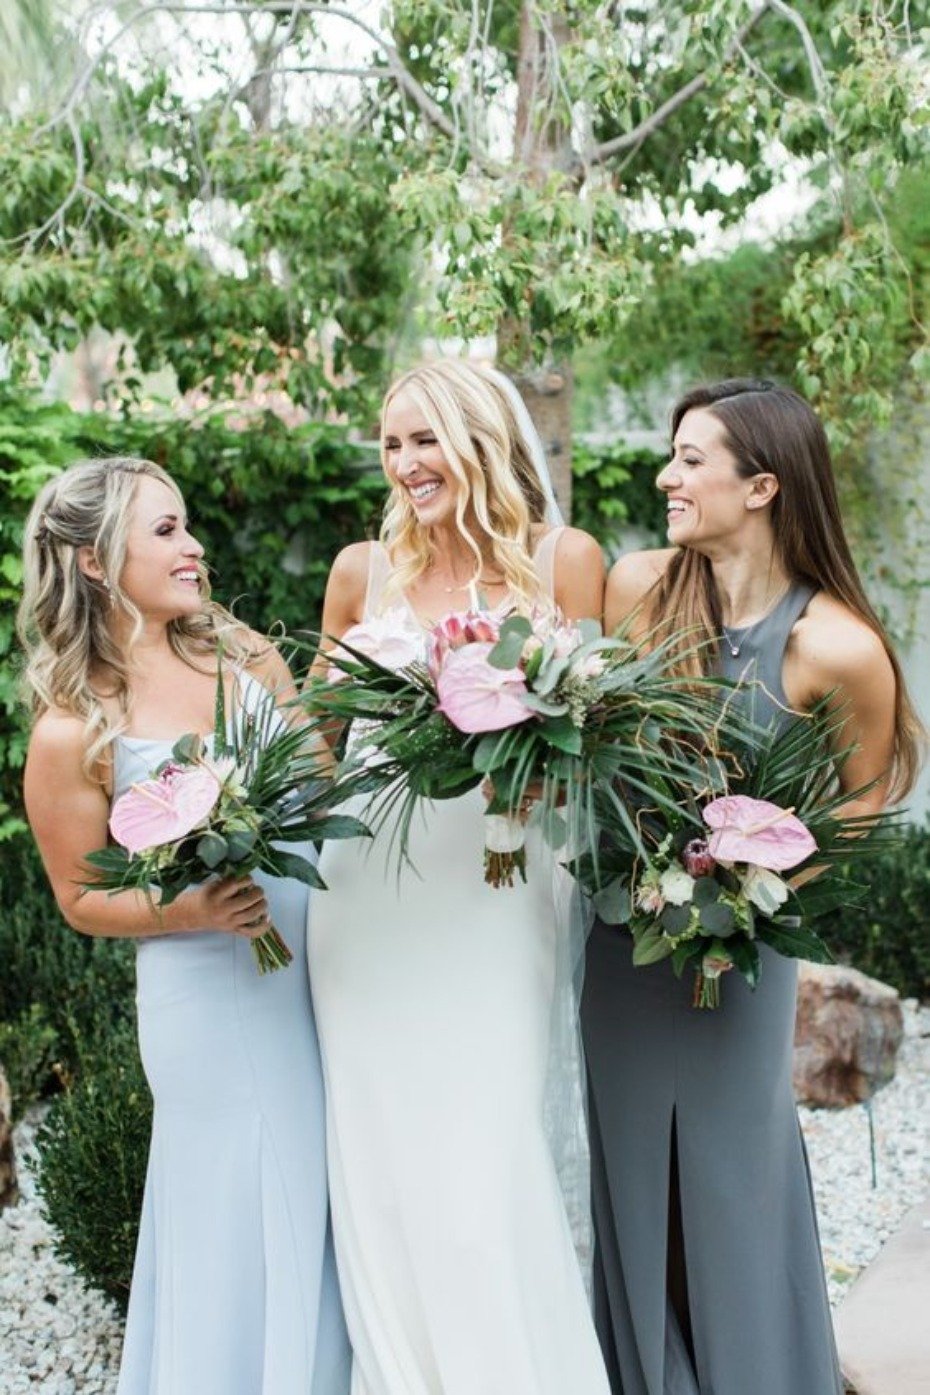 7 Tips for Being The Best Bridesmaid Ever